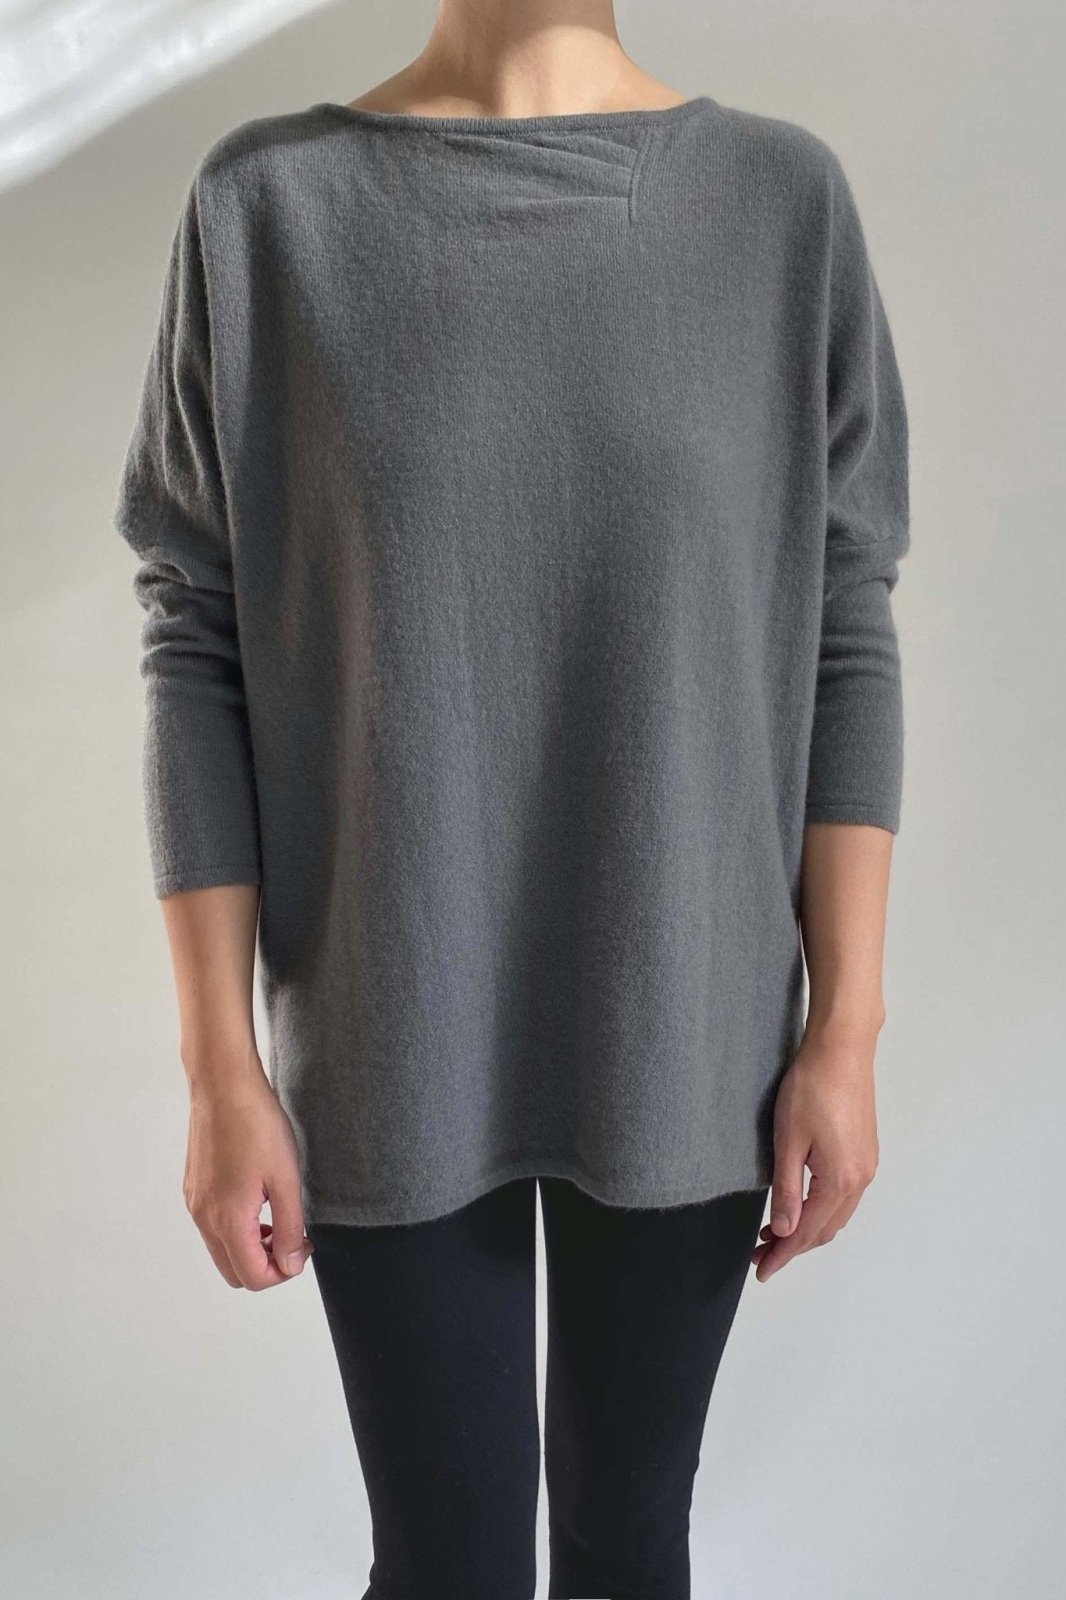 Boxy sweater with front pleats in ash grey - SEMON Cashmere